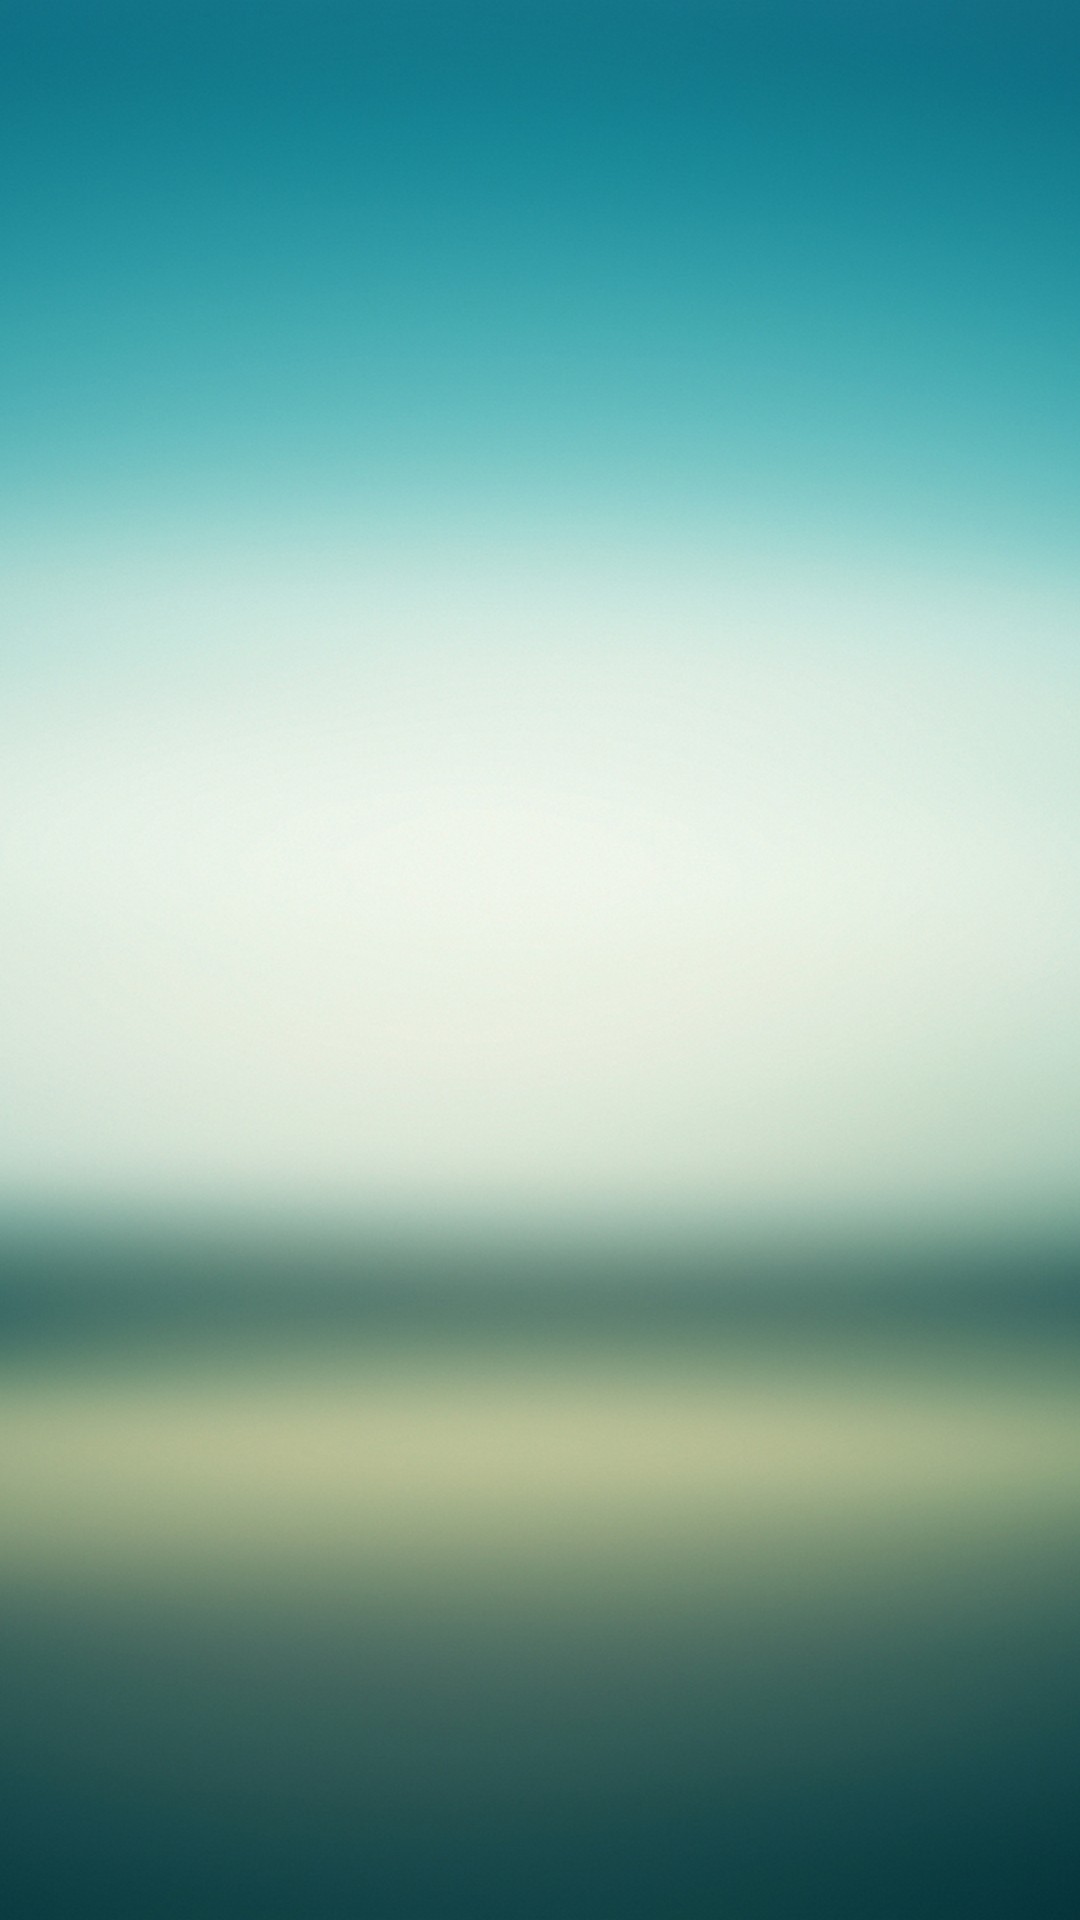 Android Wallpaper Teal Green with image resolution 1080x1920 pixel. You can make this wallpaper for your Android backgrounds, Tablet, Smartphones Screensavers and Mobile Phone Lock Screen